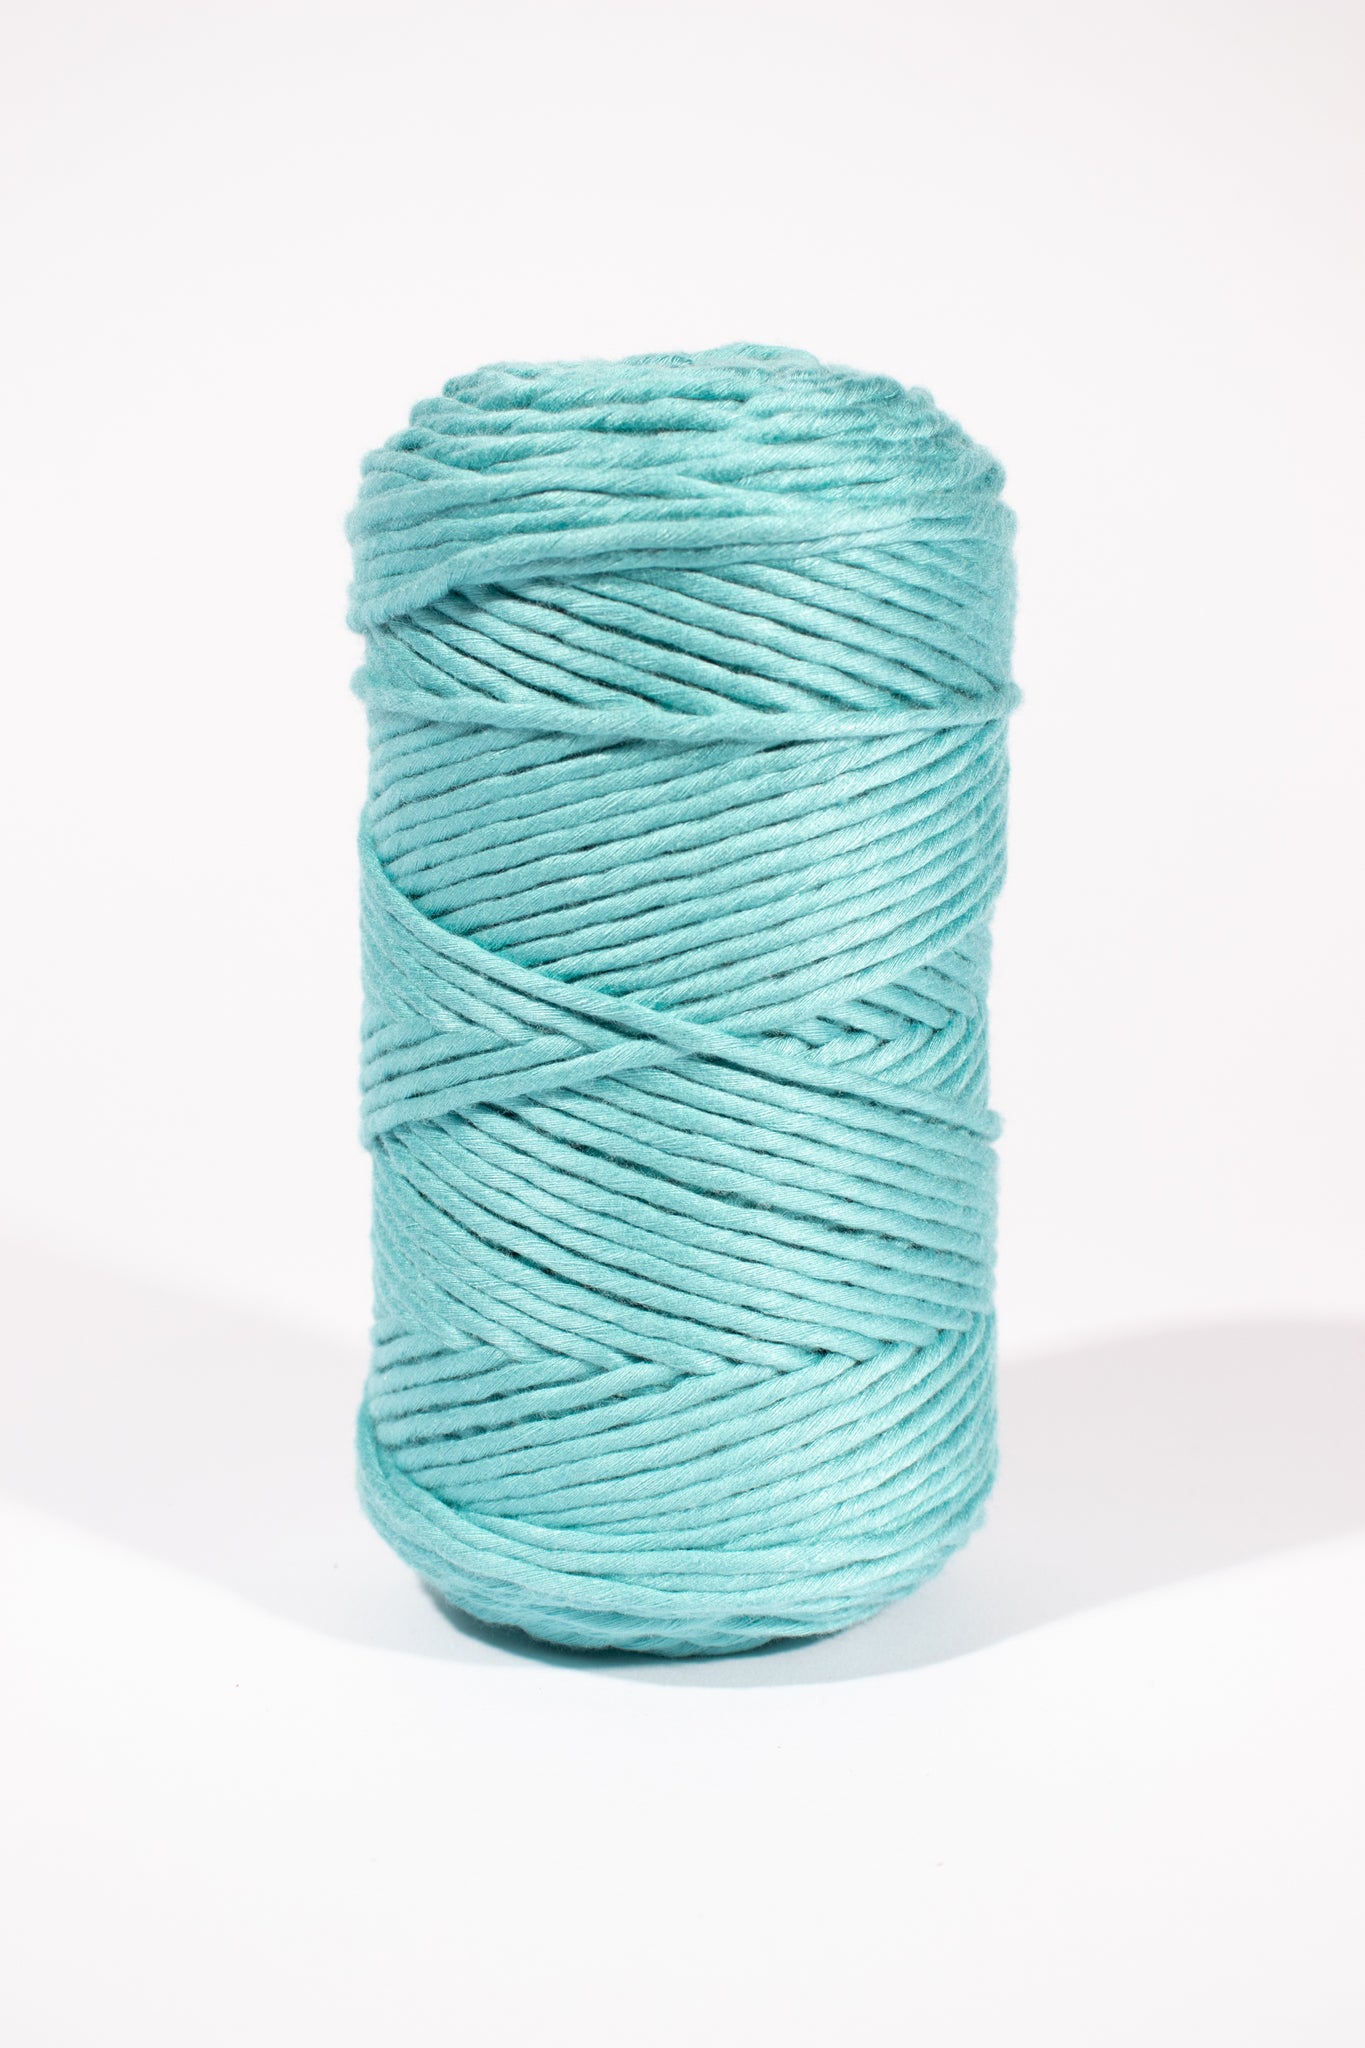 3mm bamboo super soft string for macrame - turquoise